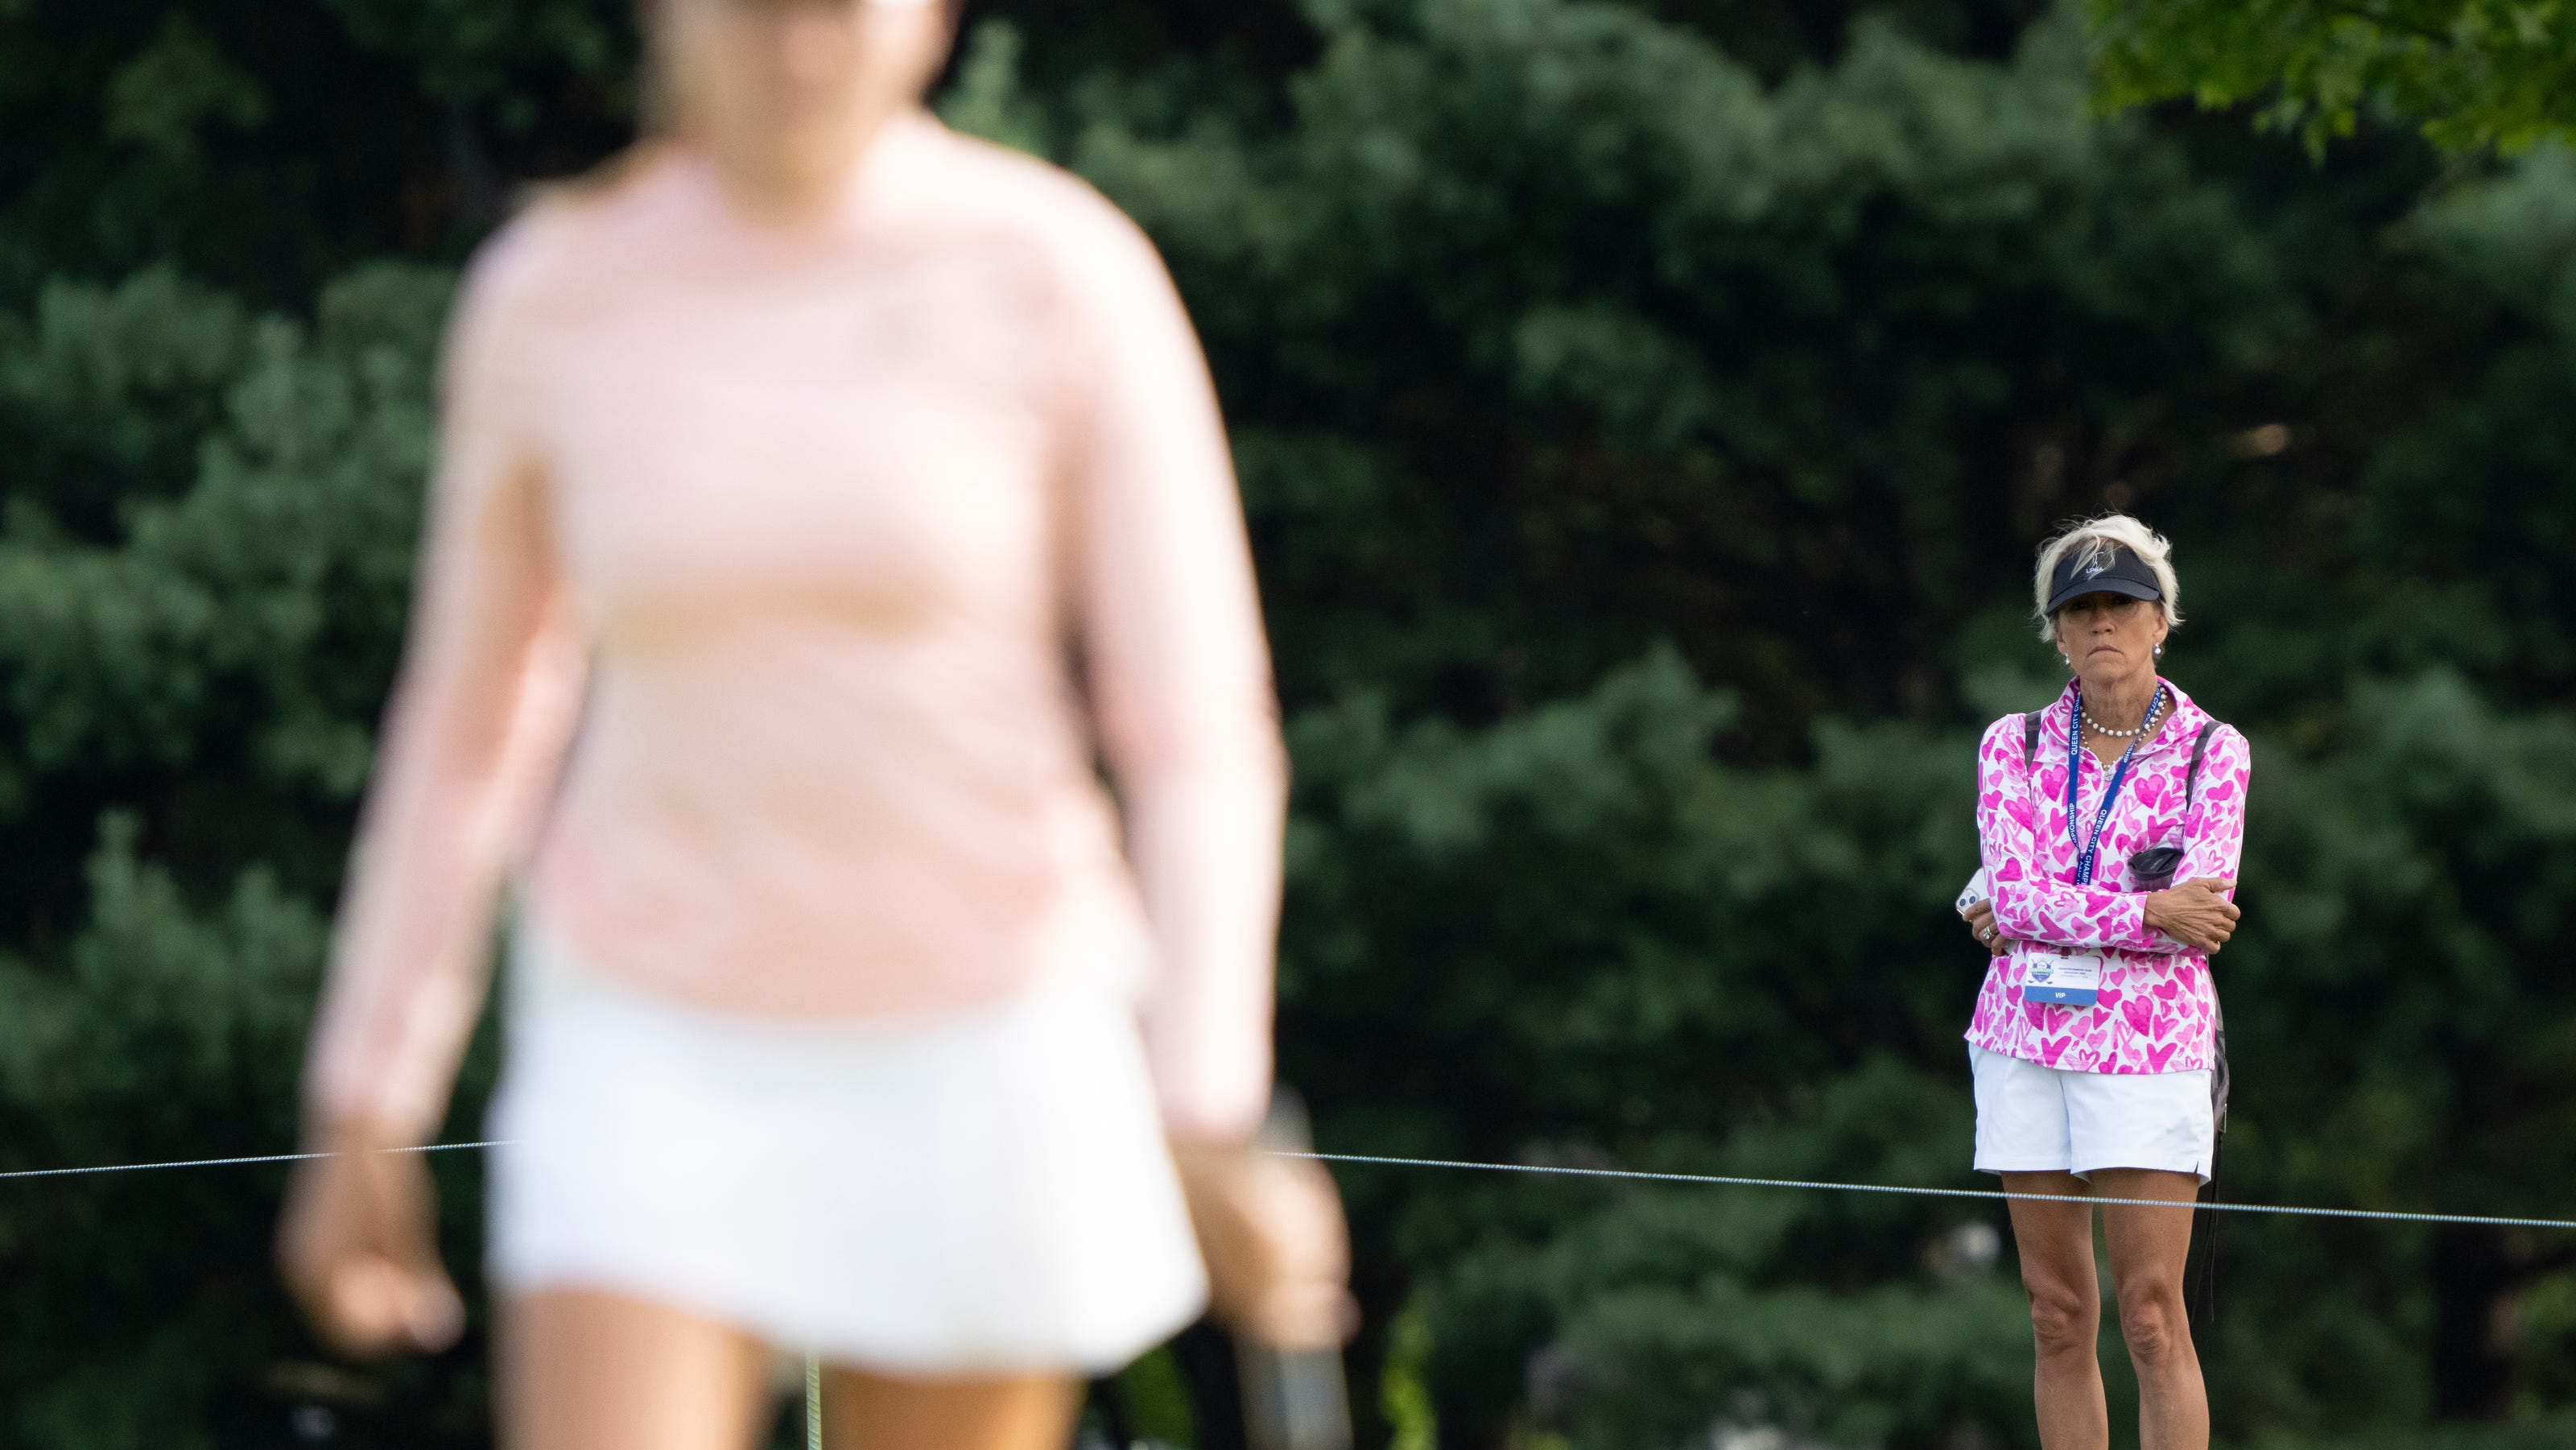  A mother, daughter connection 40 years in the making for Jillian Hollis at the LPGA Queen City Championship 